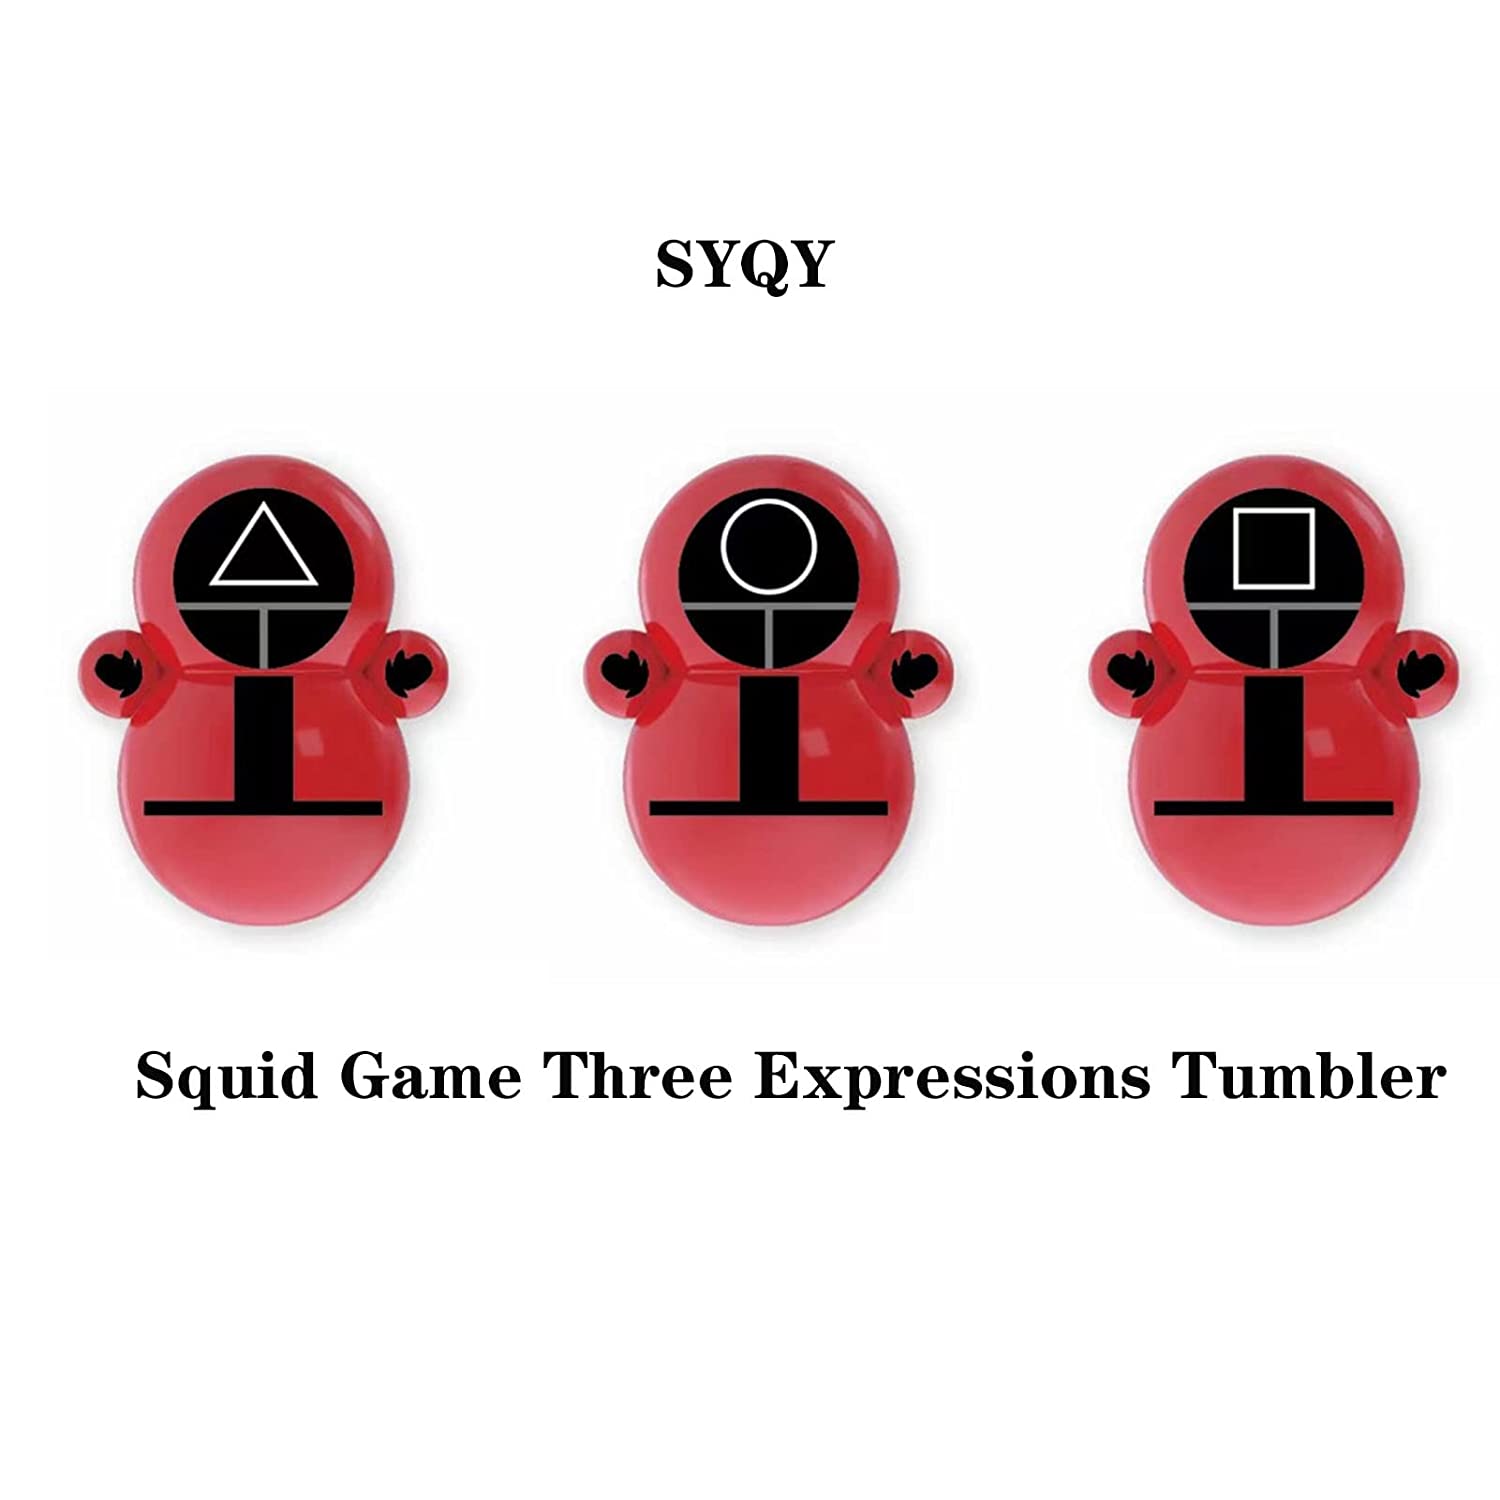 Squid Game Three Expressions Tumbler, Squid Game Self-righting Doll, Fidget Toys, A Small Desktop Toy, Can Solve Your Irritability, Random Eexpressions (20 Pcs)